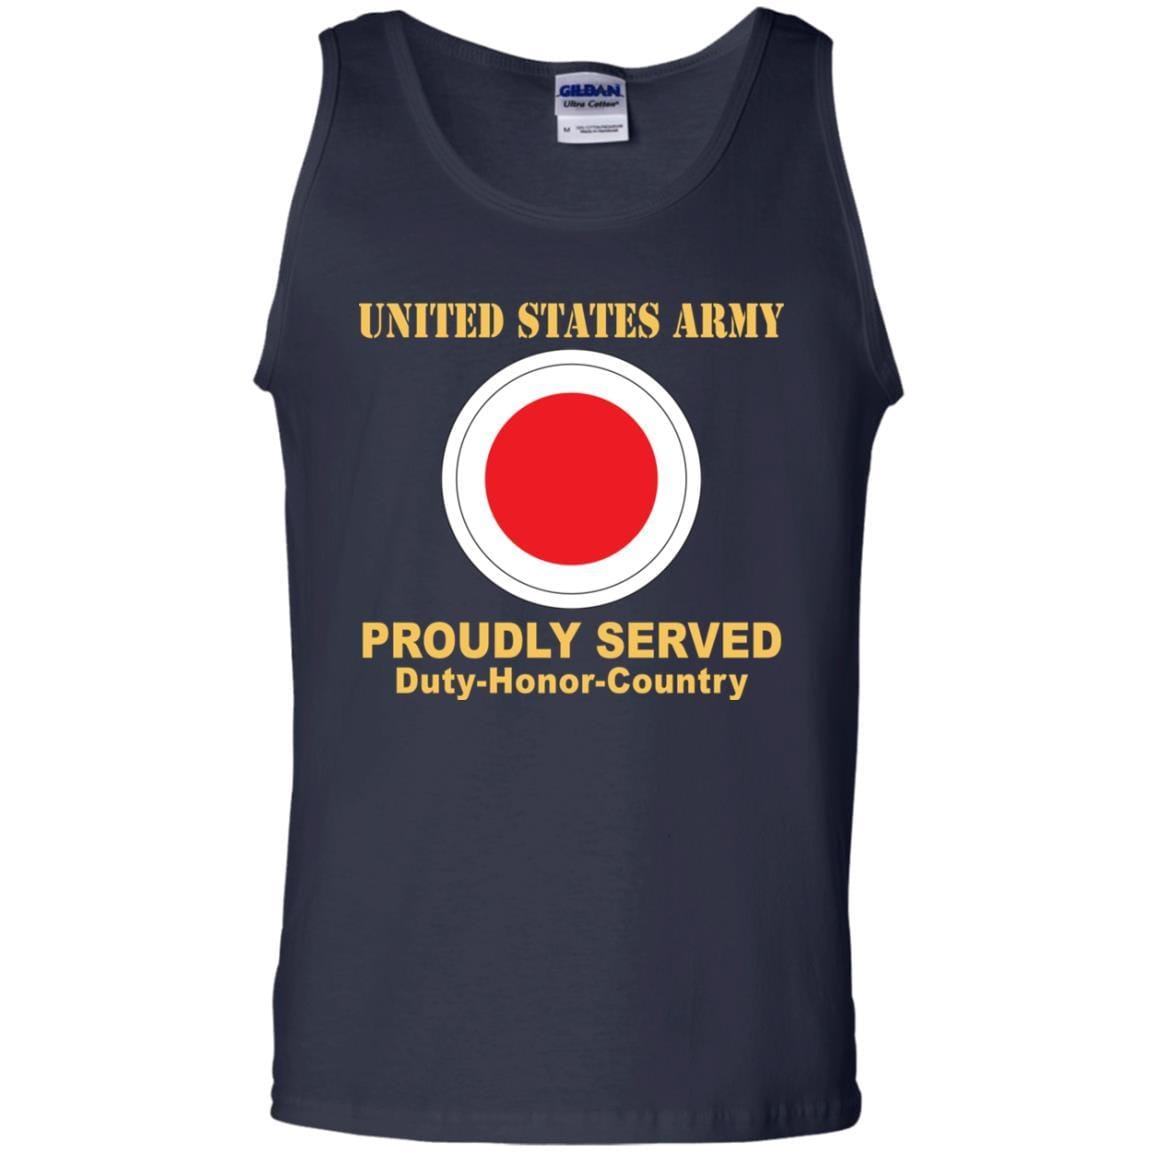 US ARMY 37TH INFANTRY BRIGADE COMBAT TEAM- Proudly Served T-Shirt On Front For Men-TShirt-Army-Veterans Nation